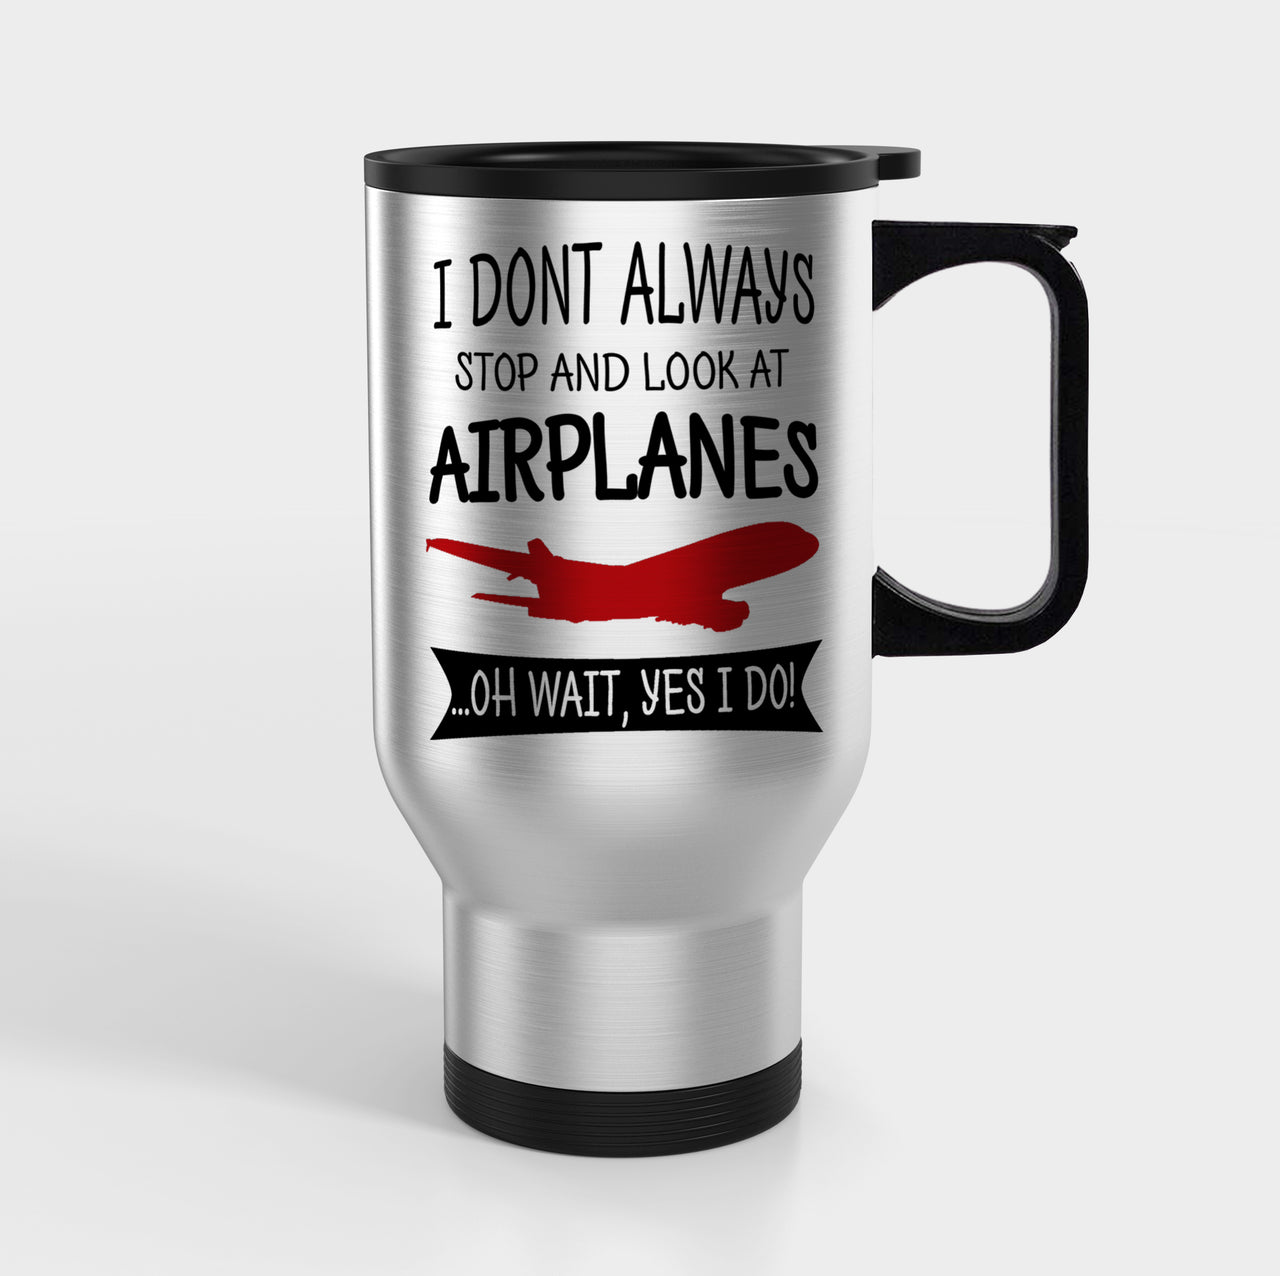 I Don't Always Stop and Look at Airplanes Designed Travel Mugs (With Holder)